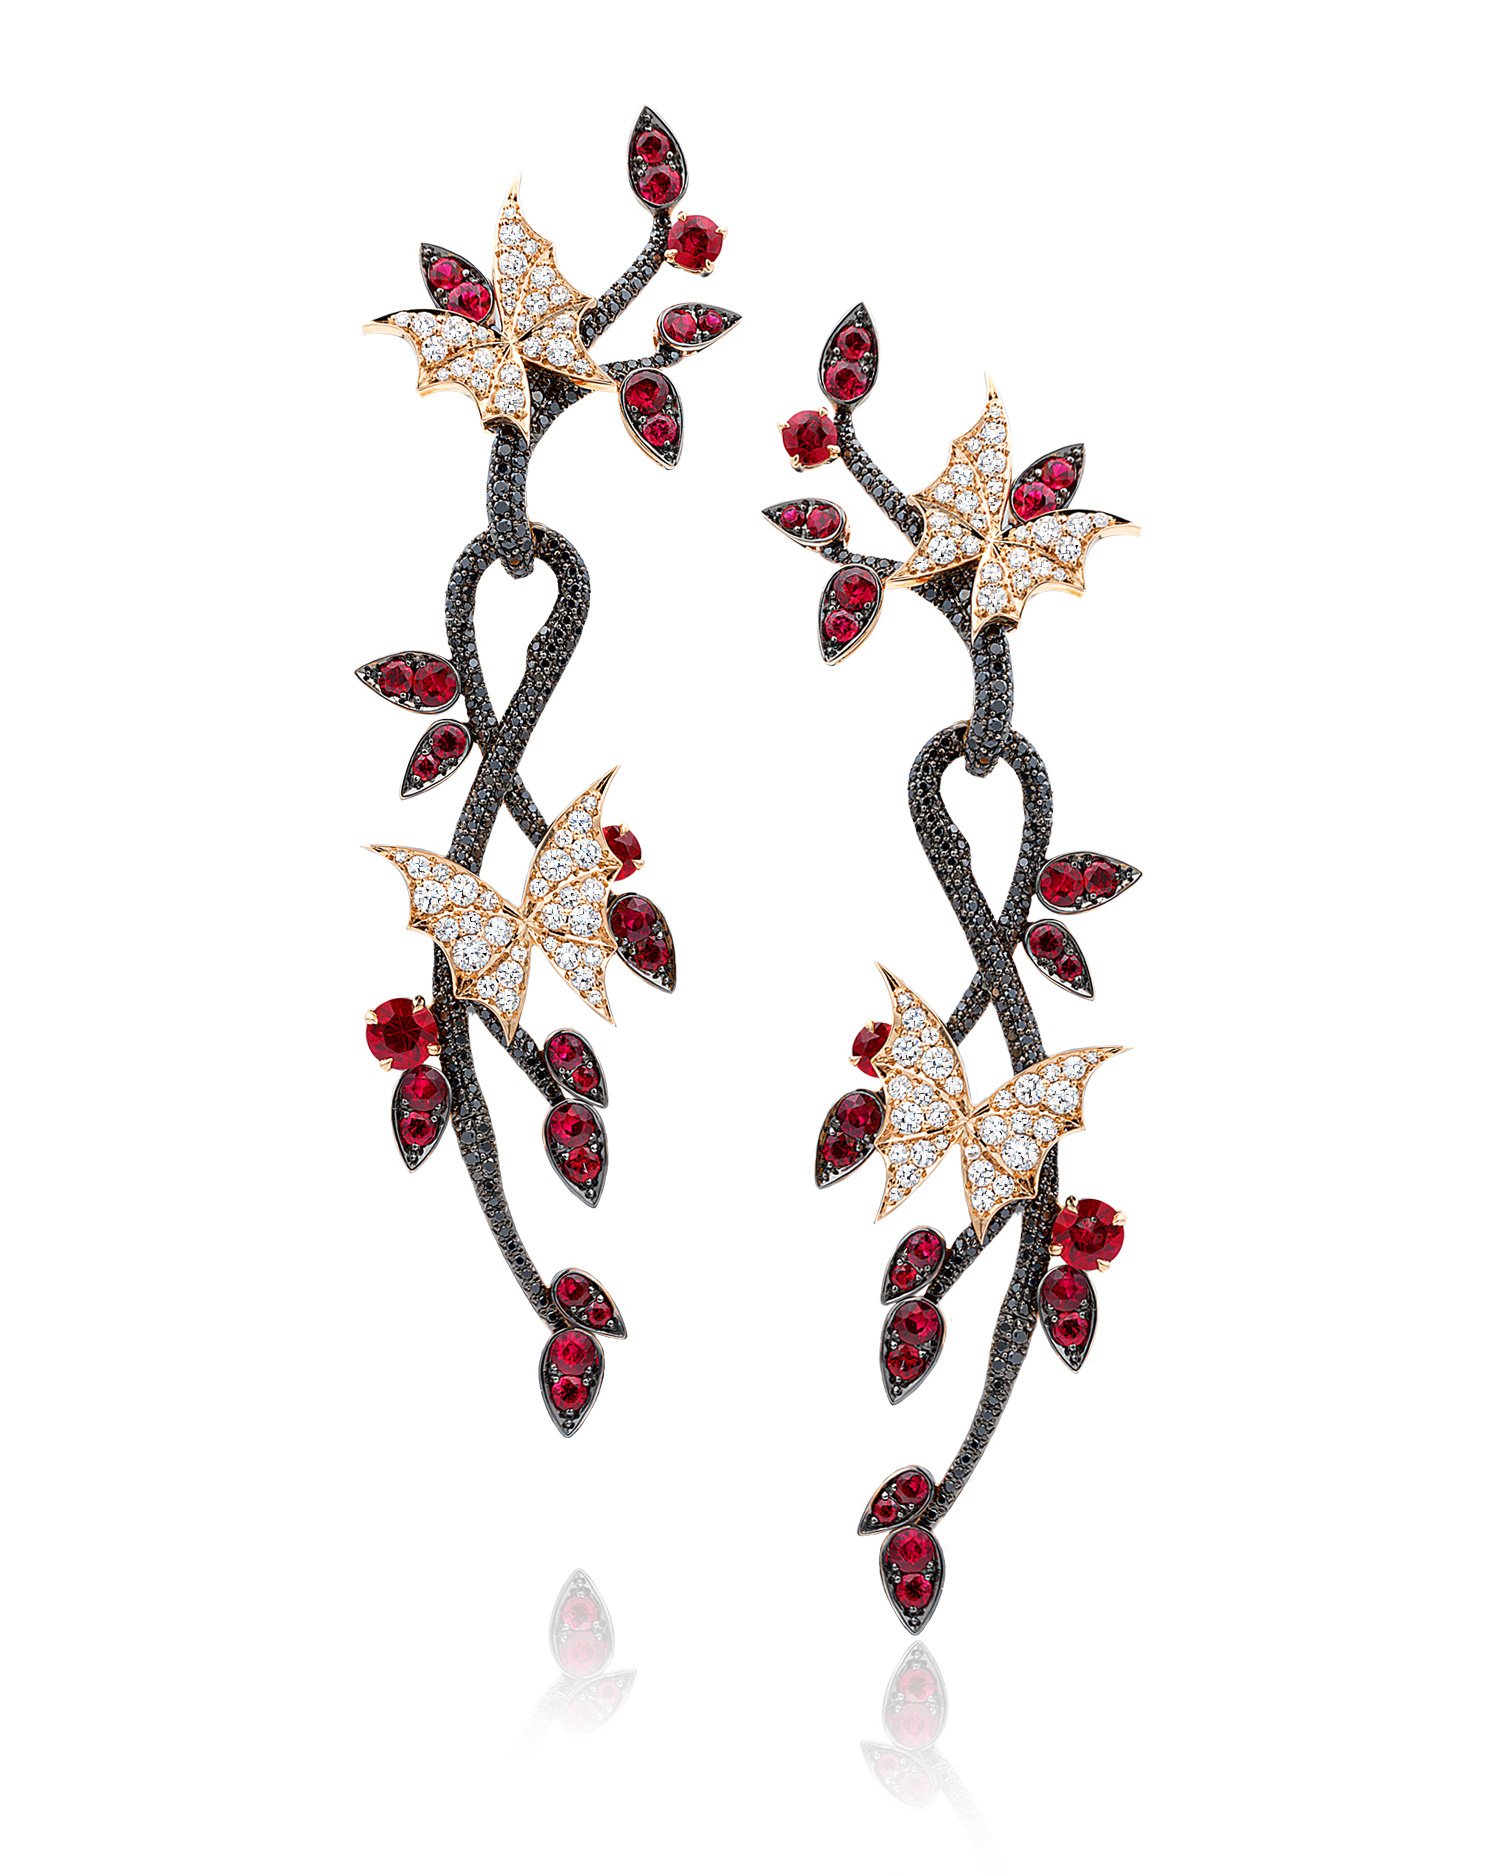 Fly by Night Forest Earrings with Pave Ruby, Black and White Diamonds in 18kt Rose Gold